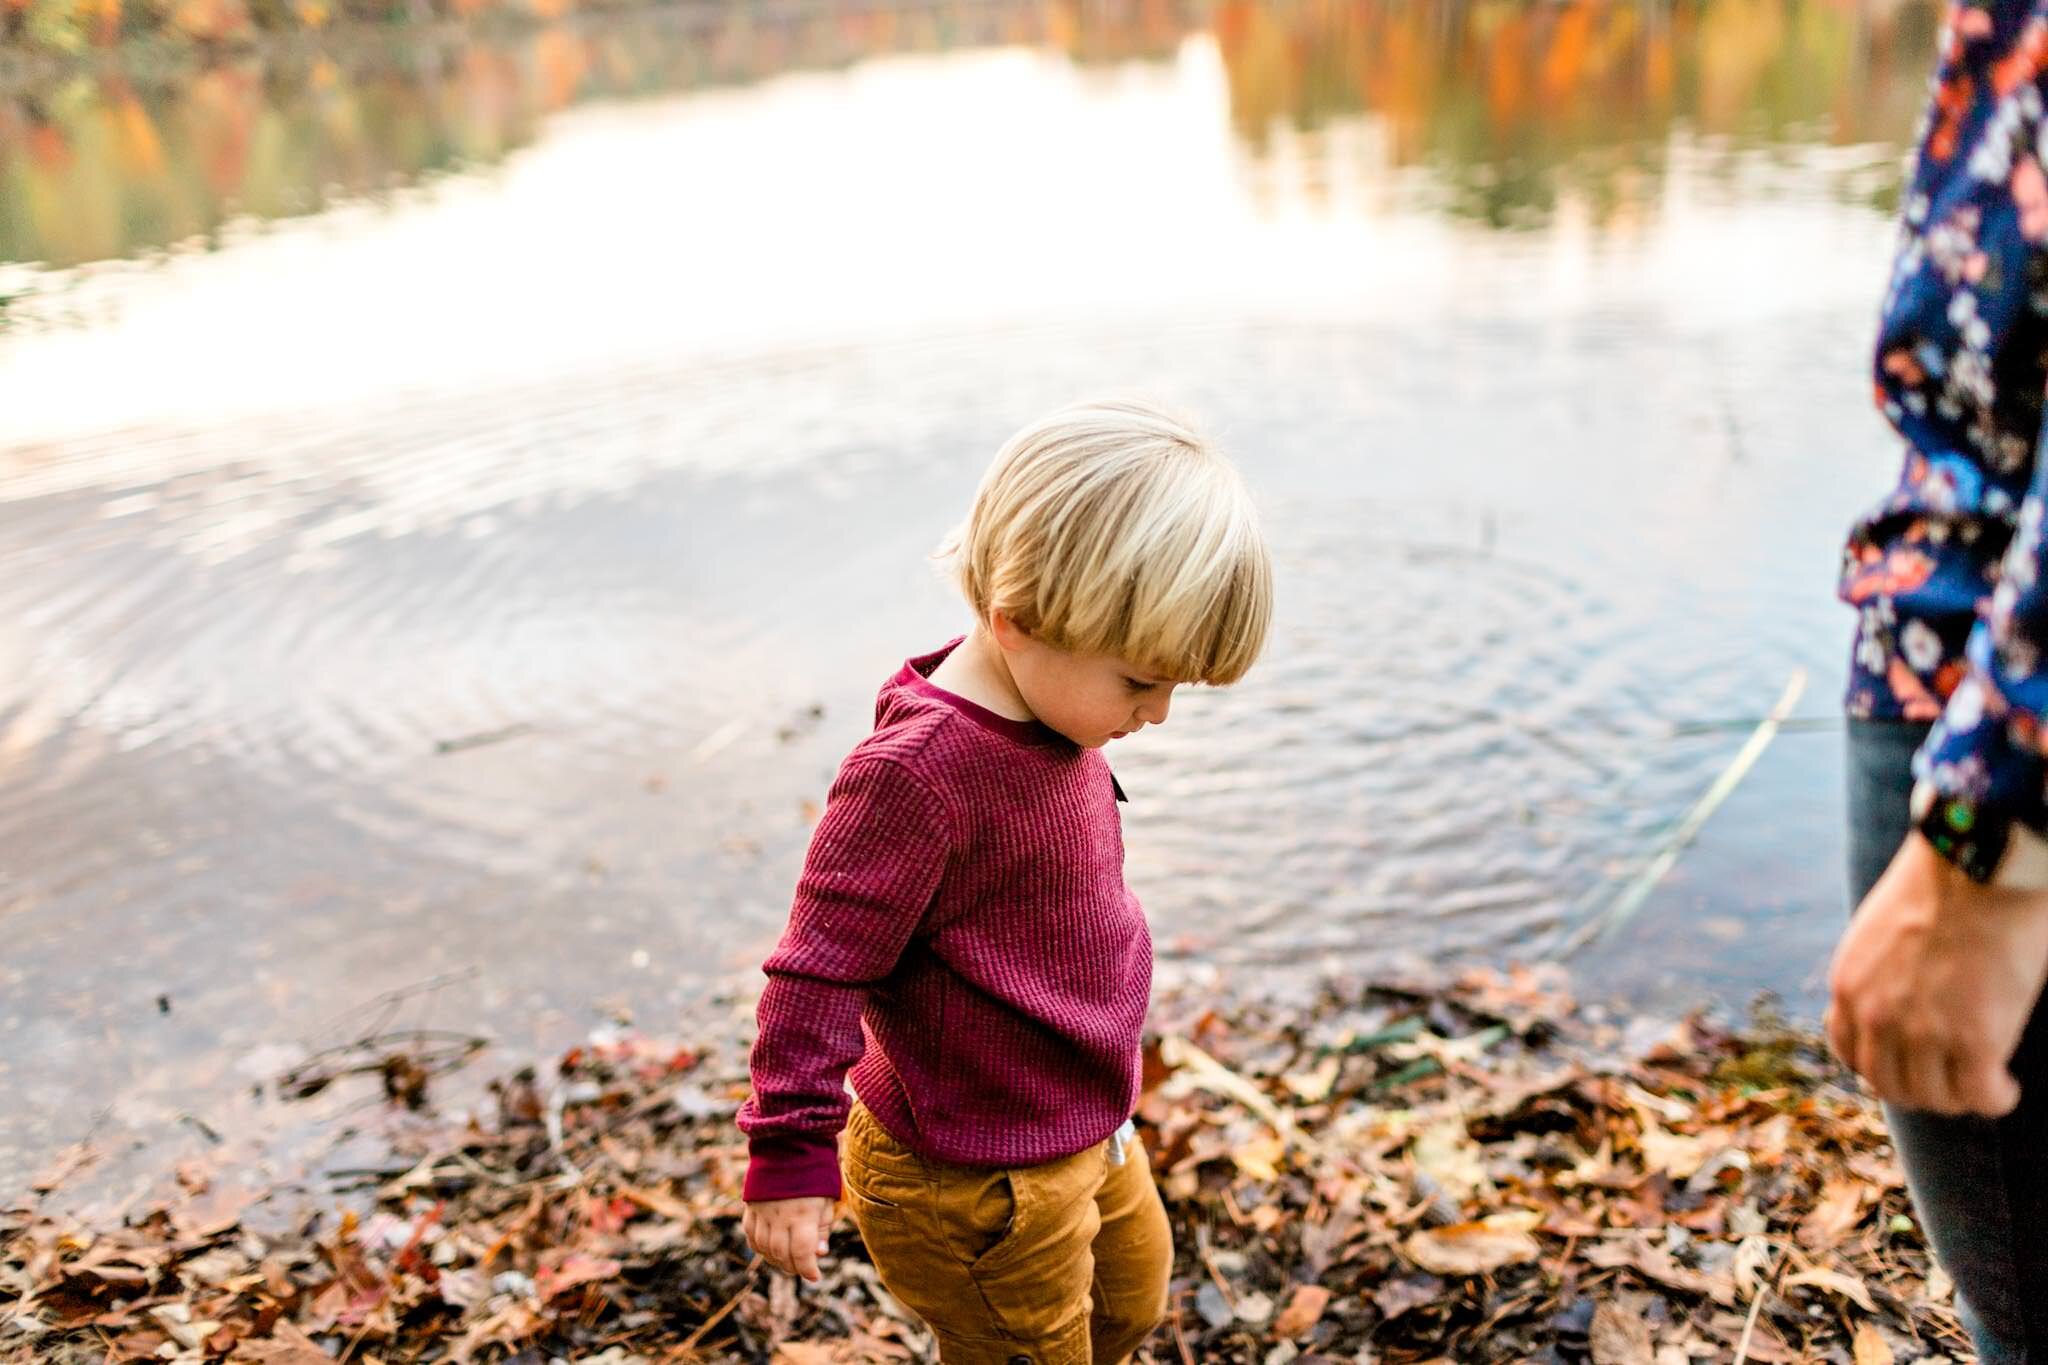 Raleigh Family Photographer at Umstead Park | By G. Lin Photography | Young boy in red shirt standing by lake